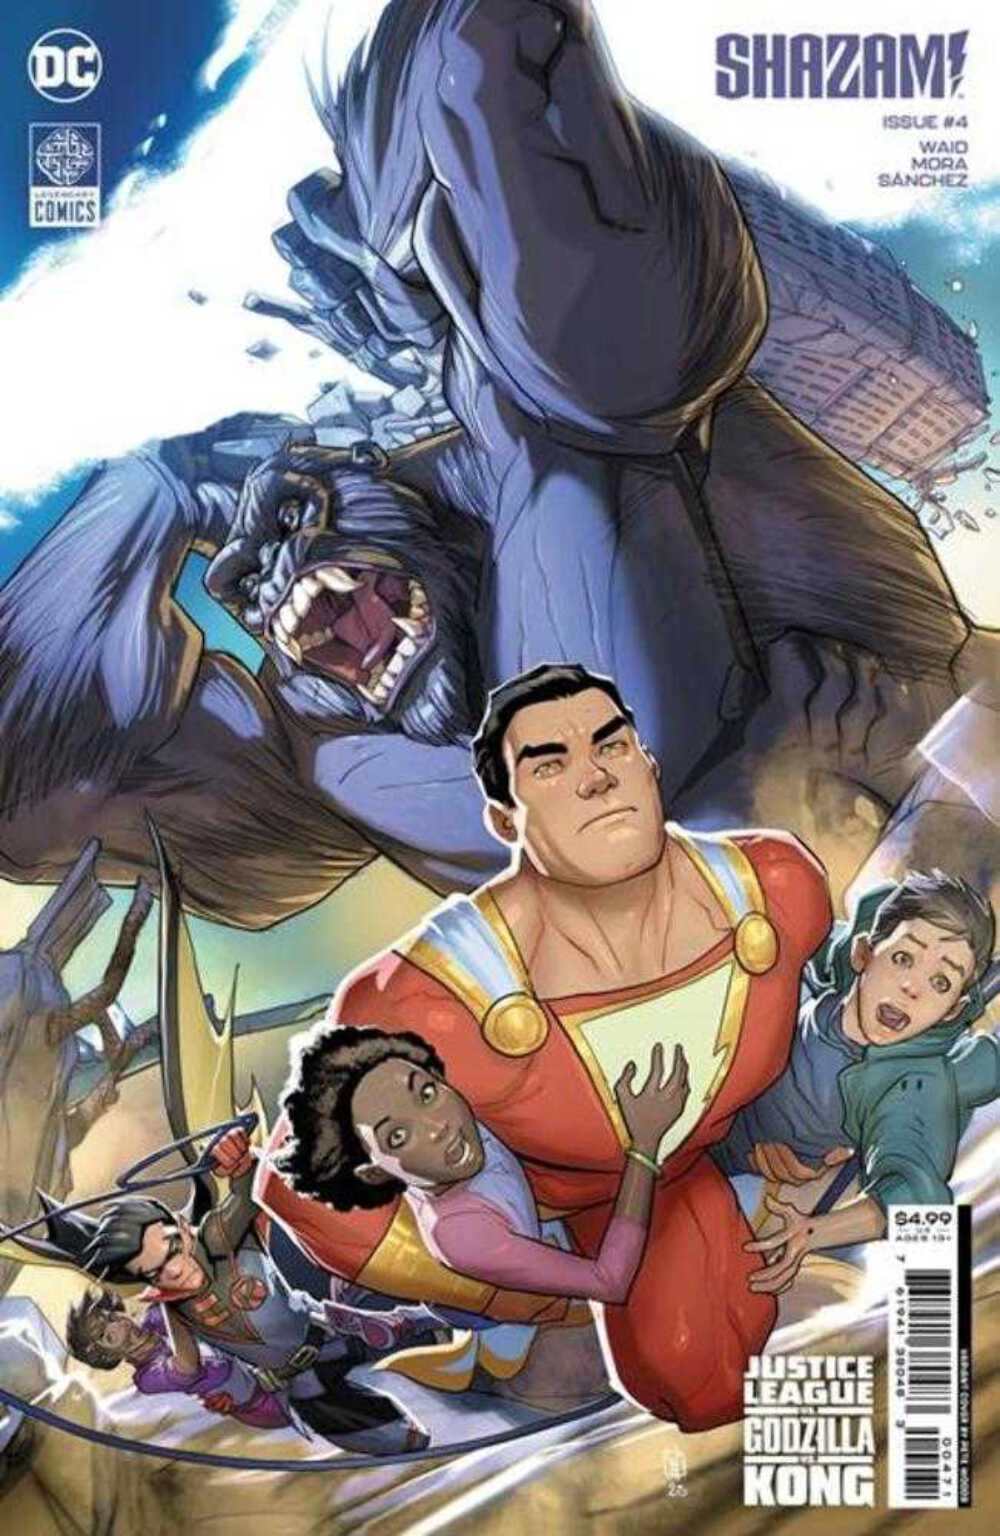 Shazam #4 Cover G Pete Woods Connecting Justice League vs Godzilla vs Kong Card